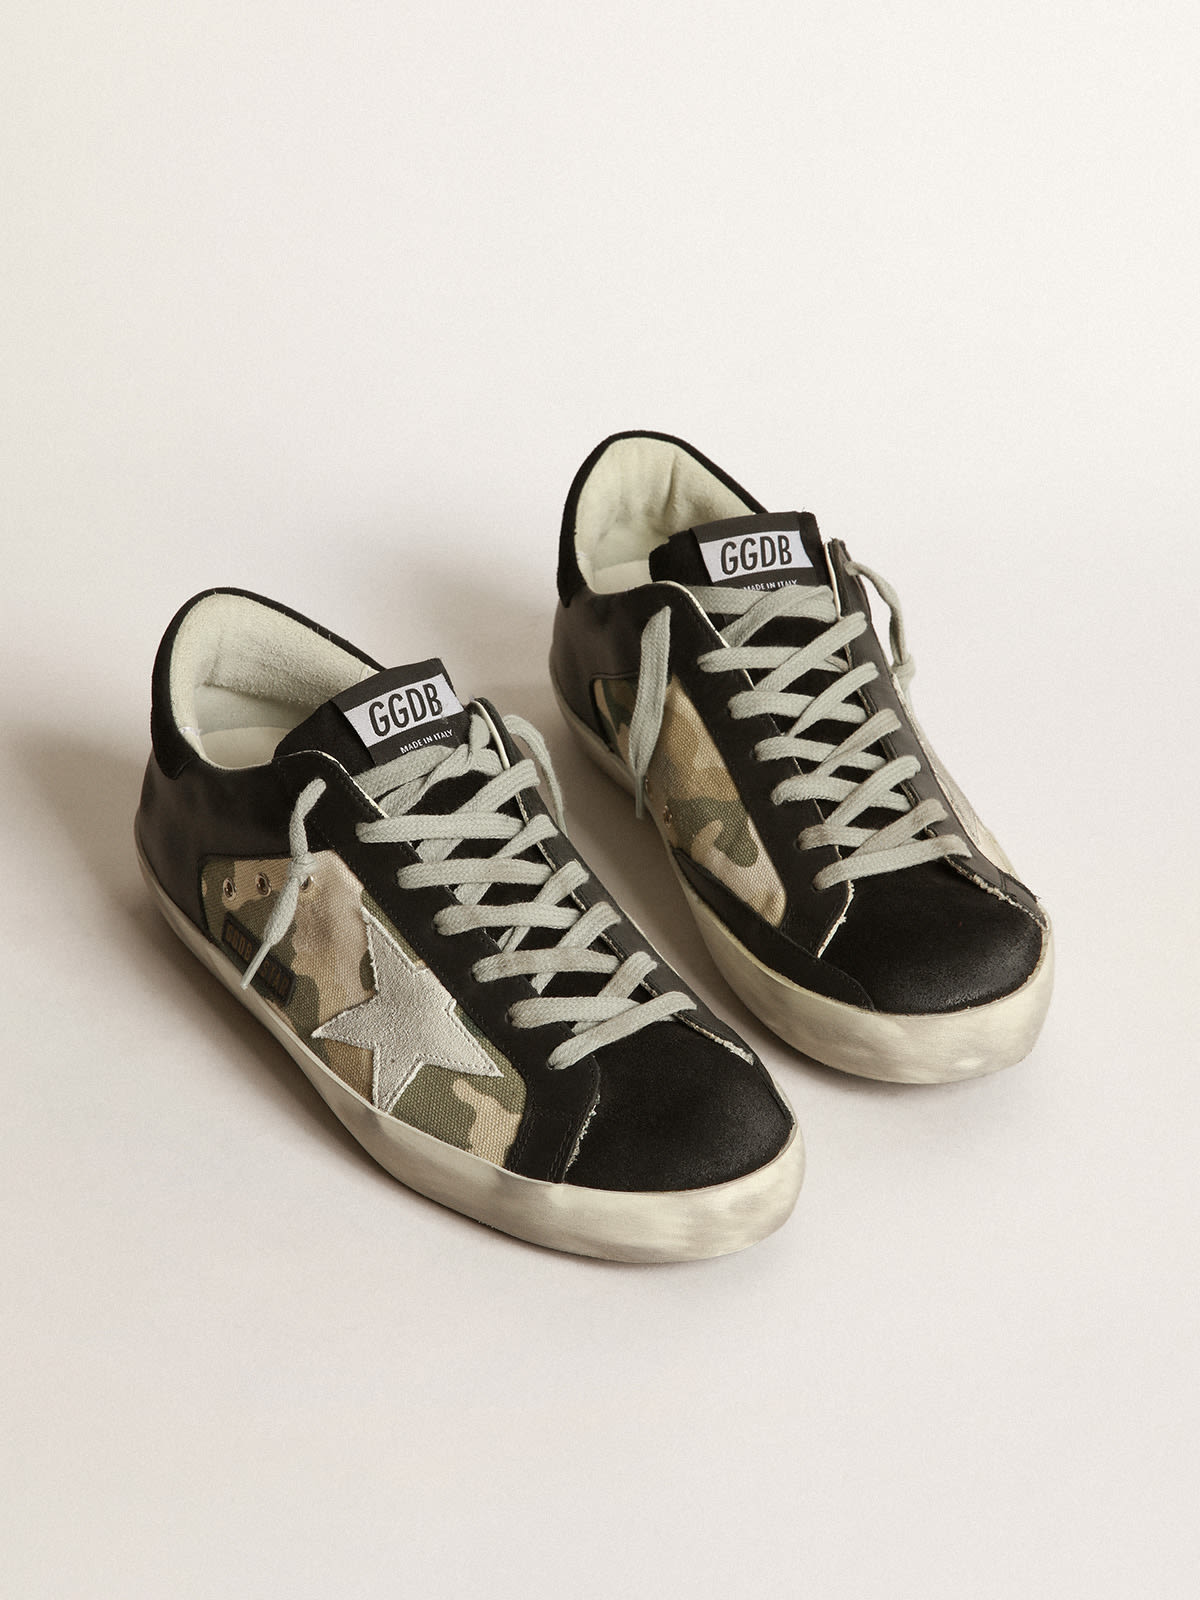 Golden Goose - Super-Star sneakers in black leather and camouflage canvas in 